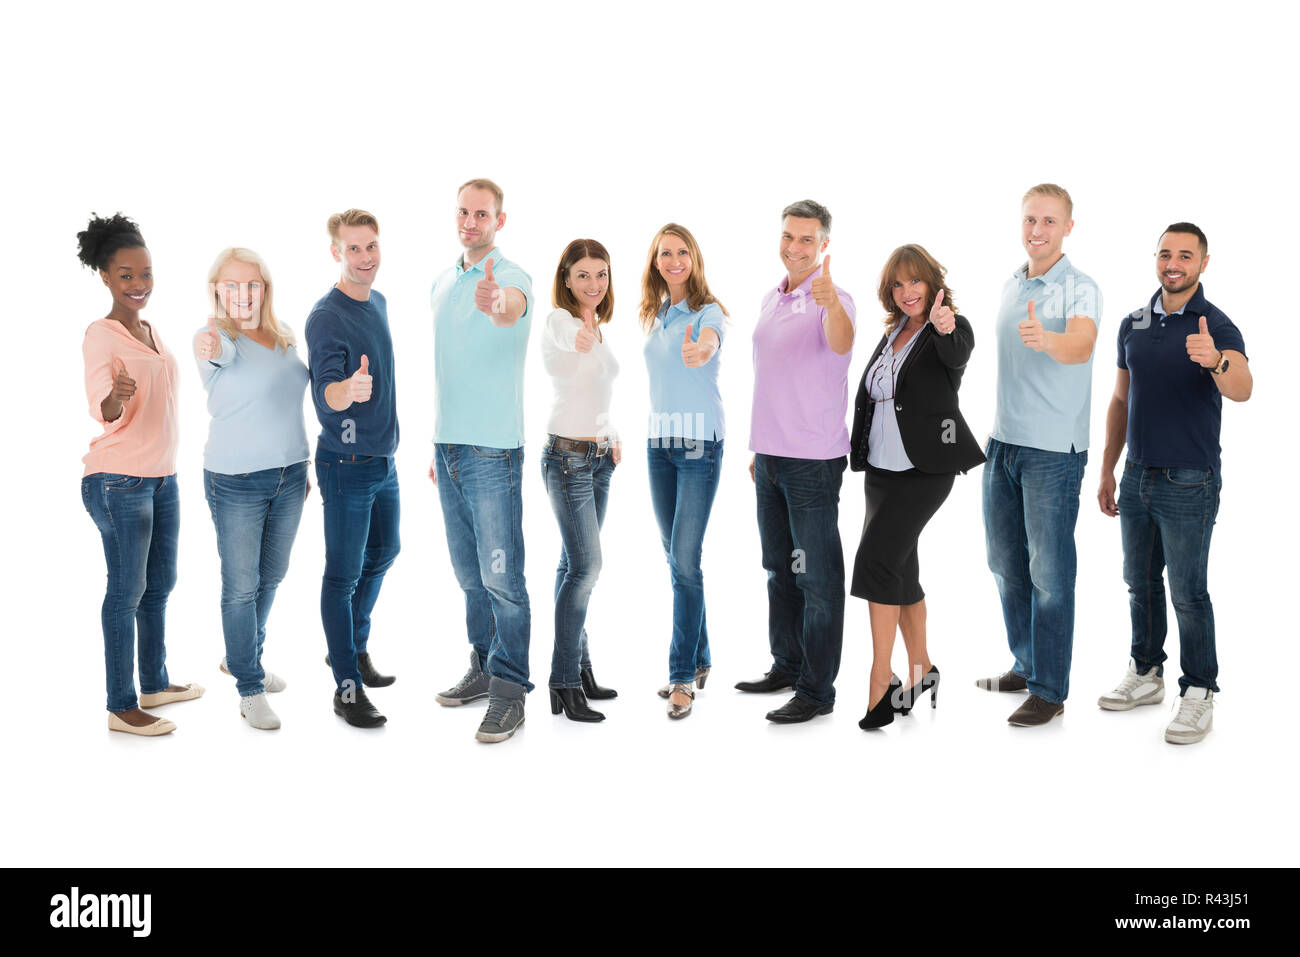 Portrait Of Creative Business People Standing Together Stock Photo